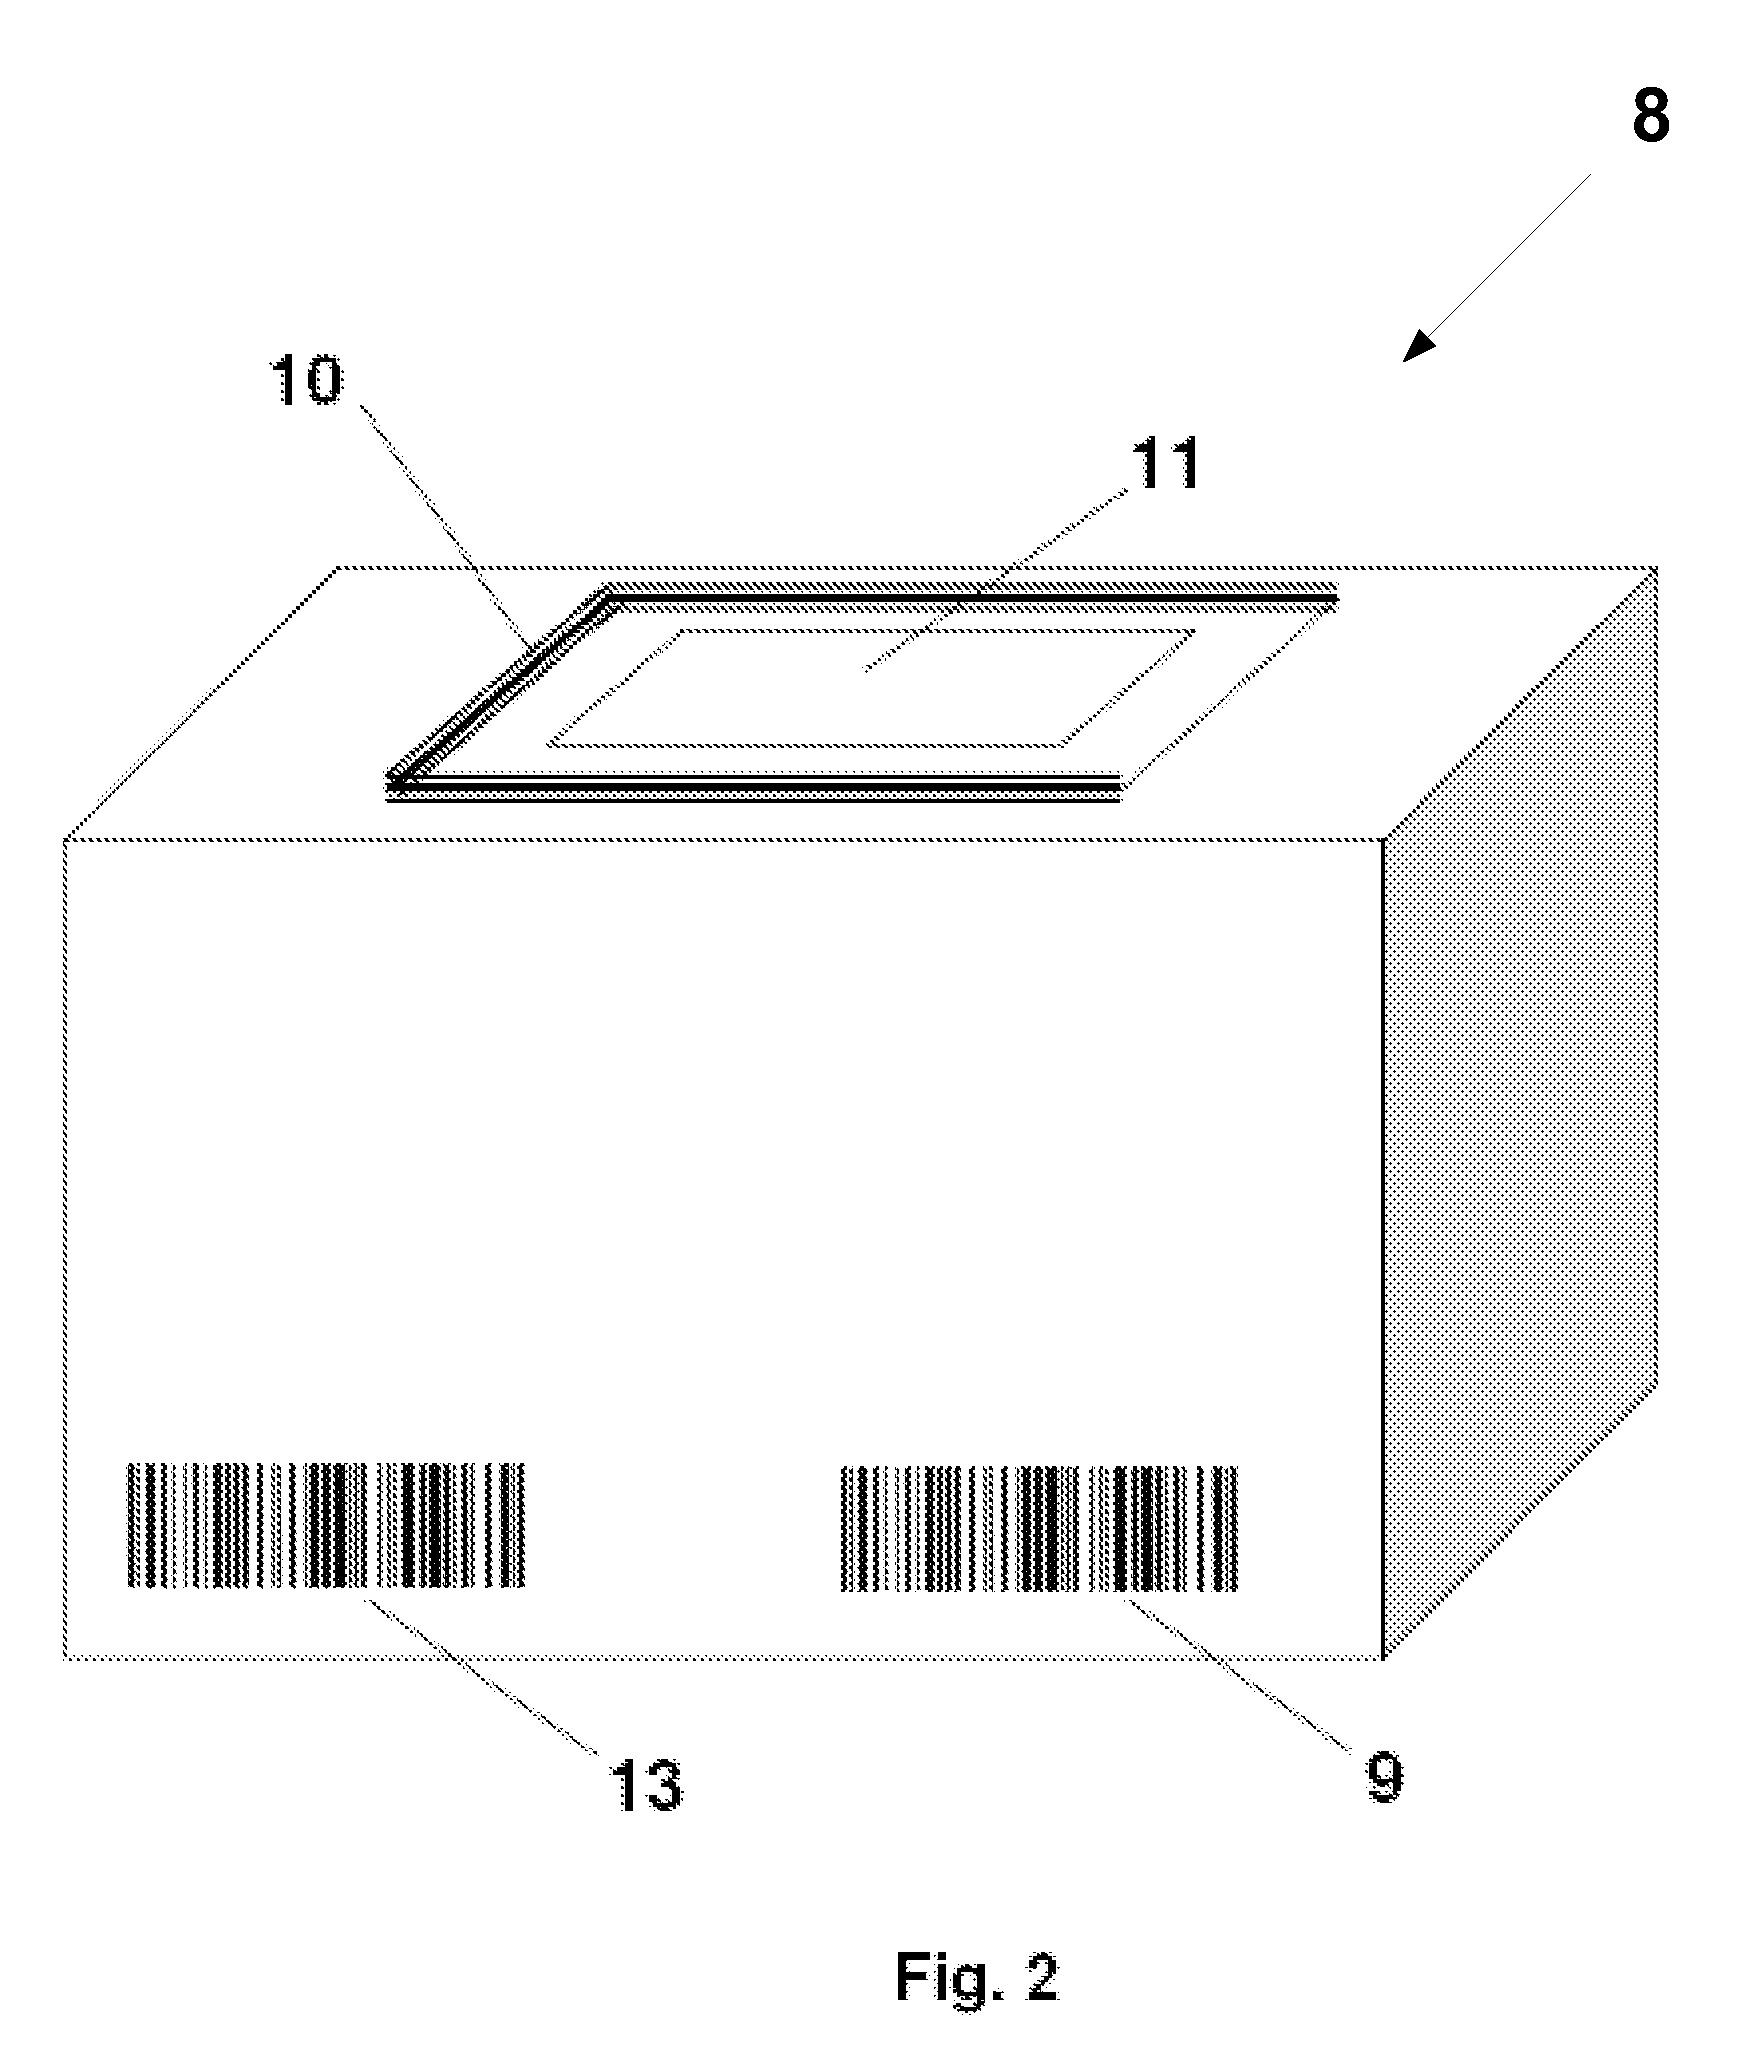 Method of reusing shipping and packing materials